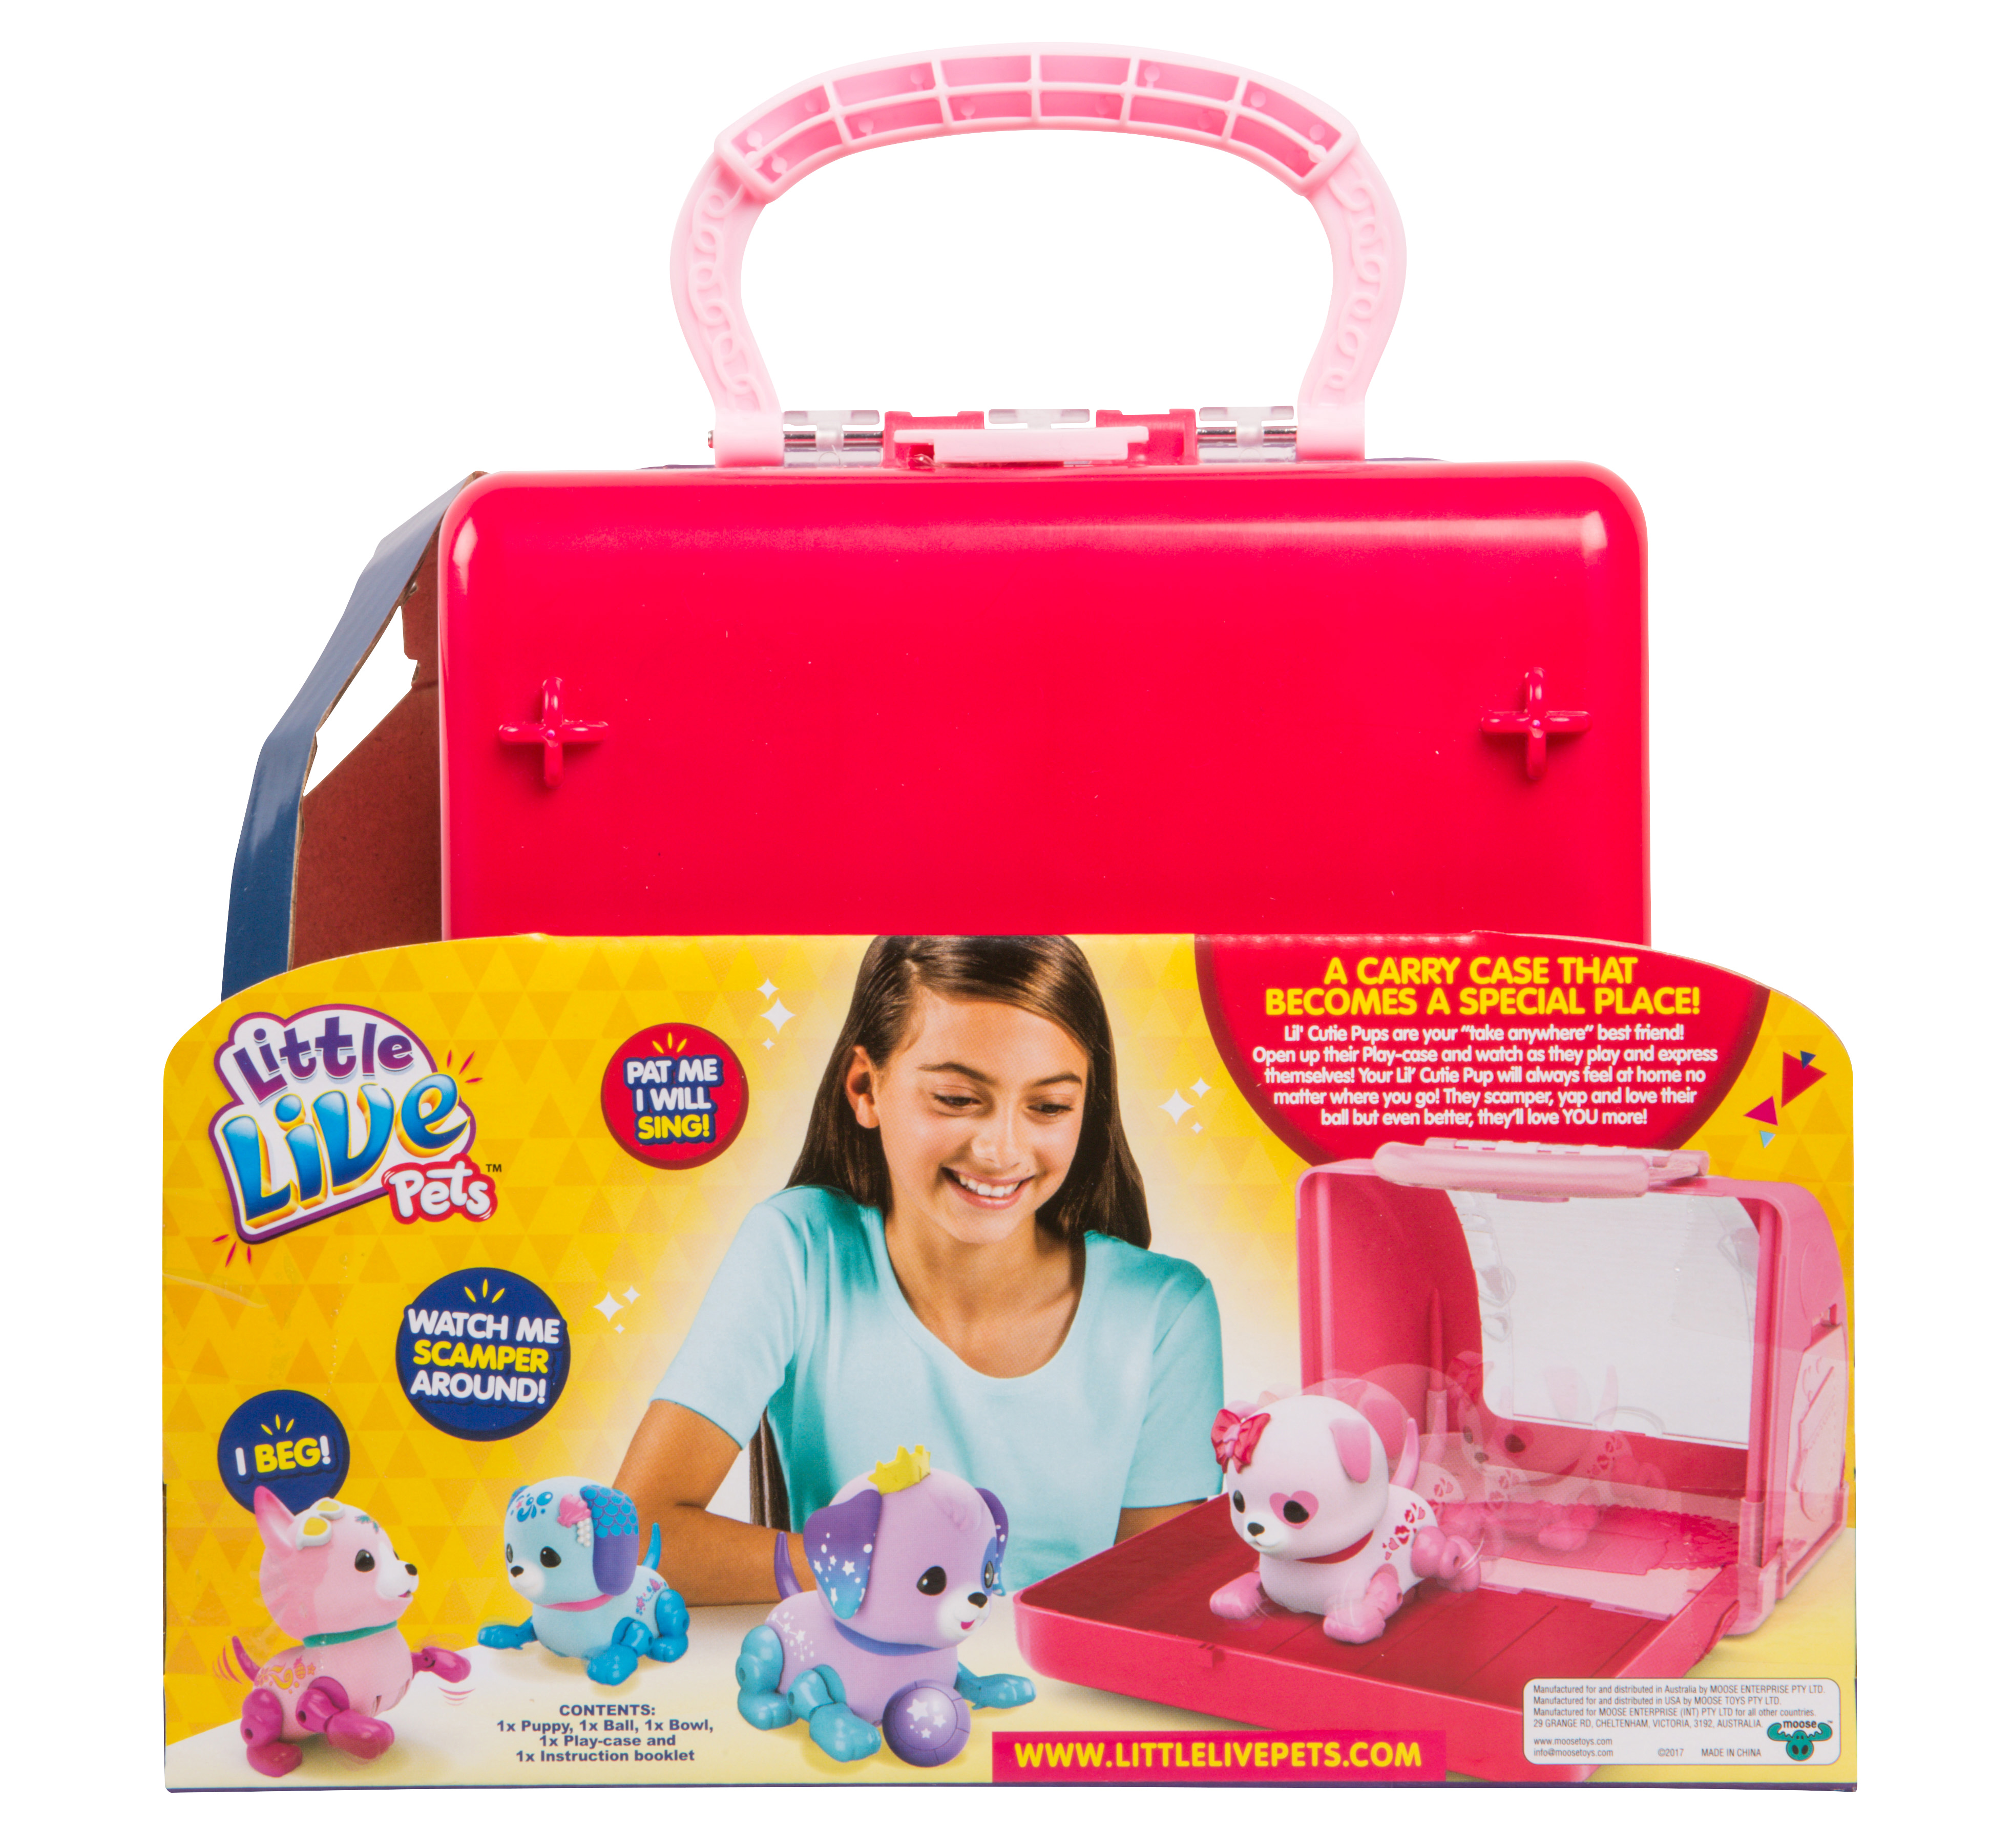 Little Live Pets Lil' Cutie Pup Playcase, Puppy Lovely - image 6 of 14